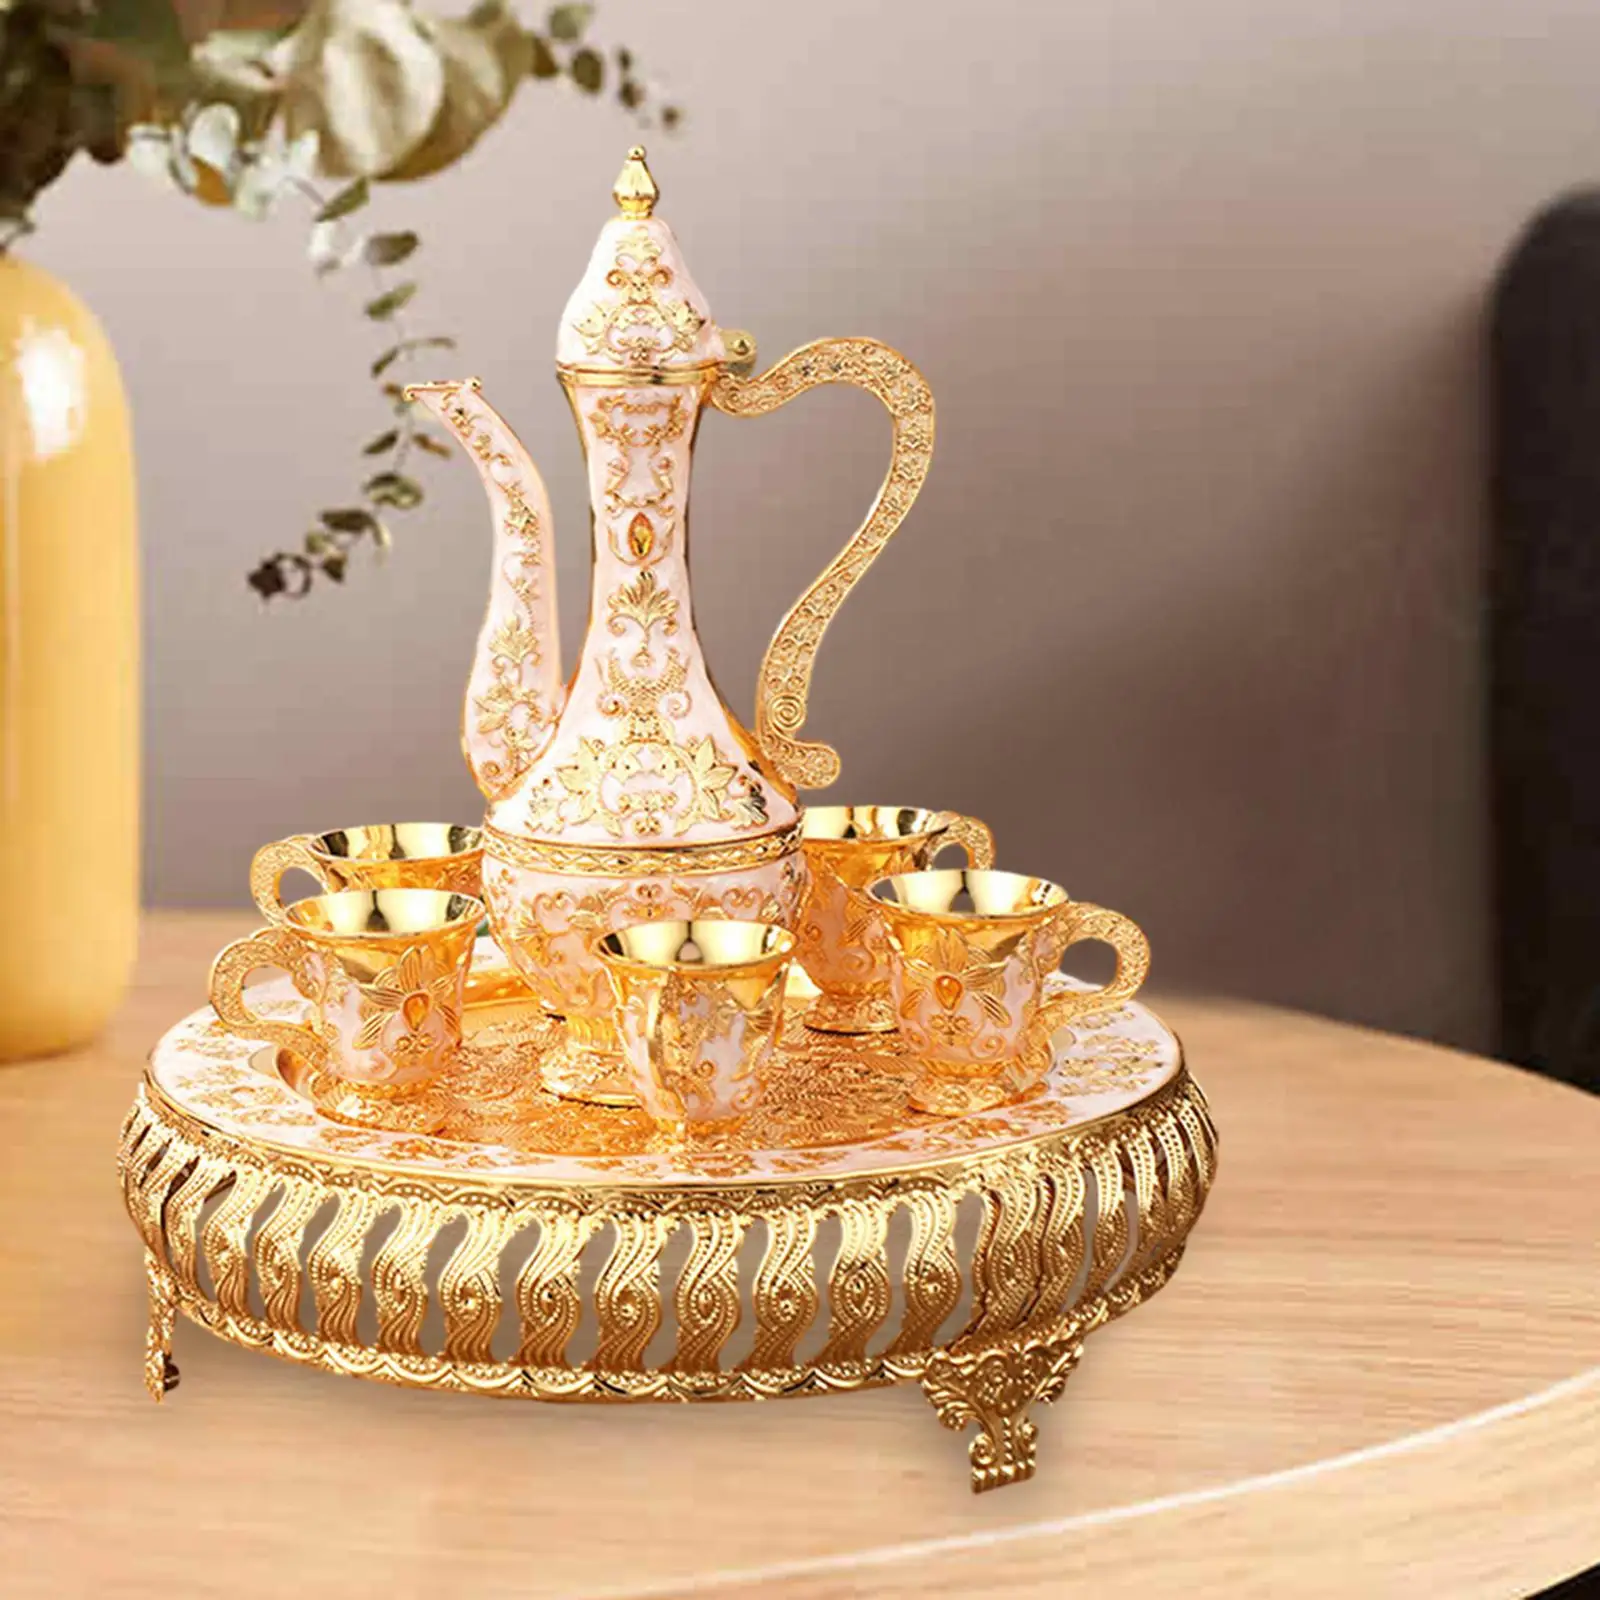 Tea Set Luxury 6 Cups Tea Serving Set for Dining Table Holiday Decor